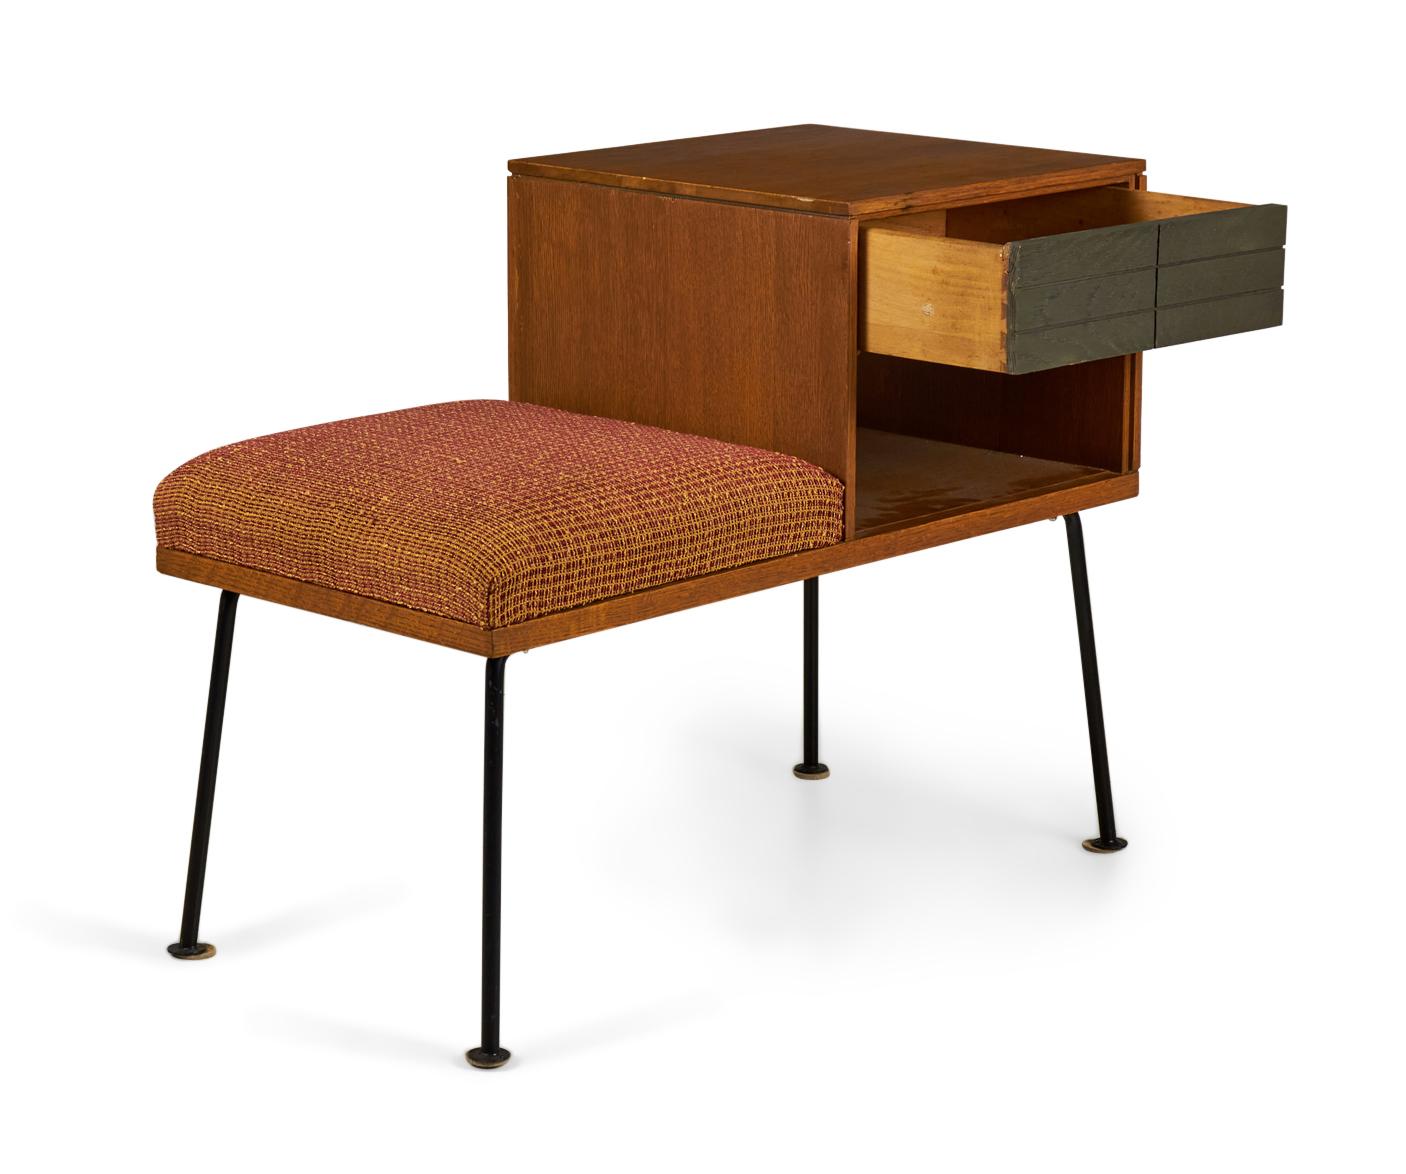 American Mid-Century walnut telephone bench with a rust orange and maroon textured fabric upholstered seat next to a side table section with a single dark stained, geometrically incised drawer above an open compartment, resting on four angled iron